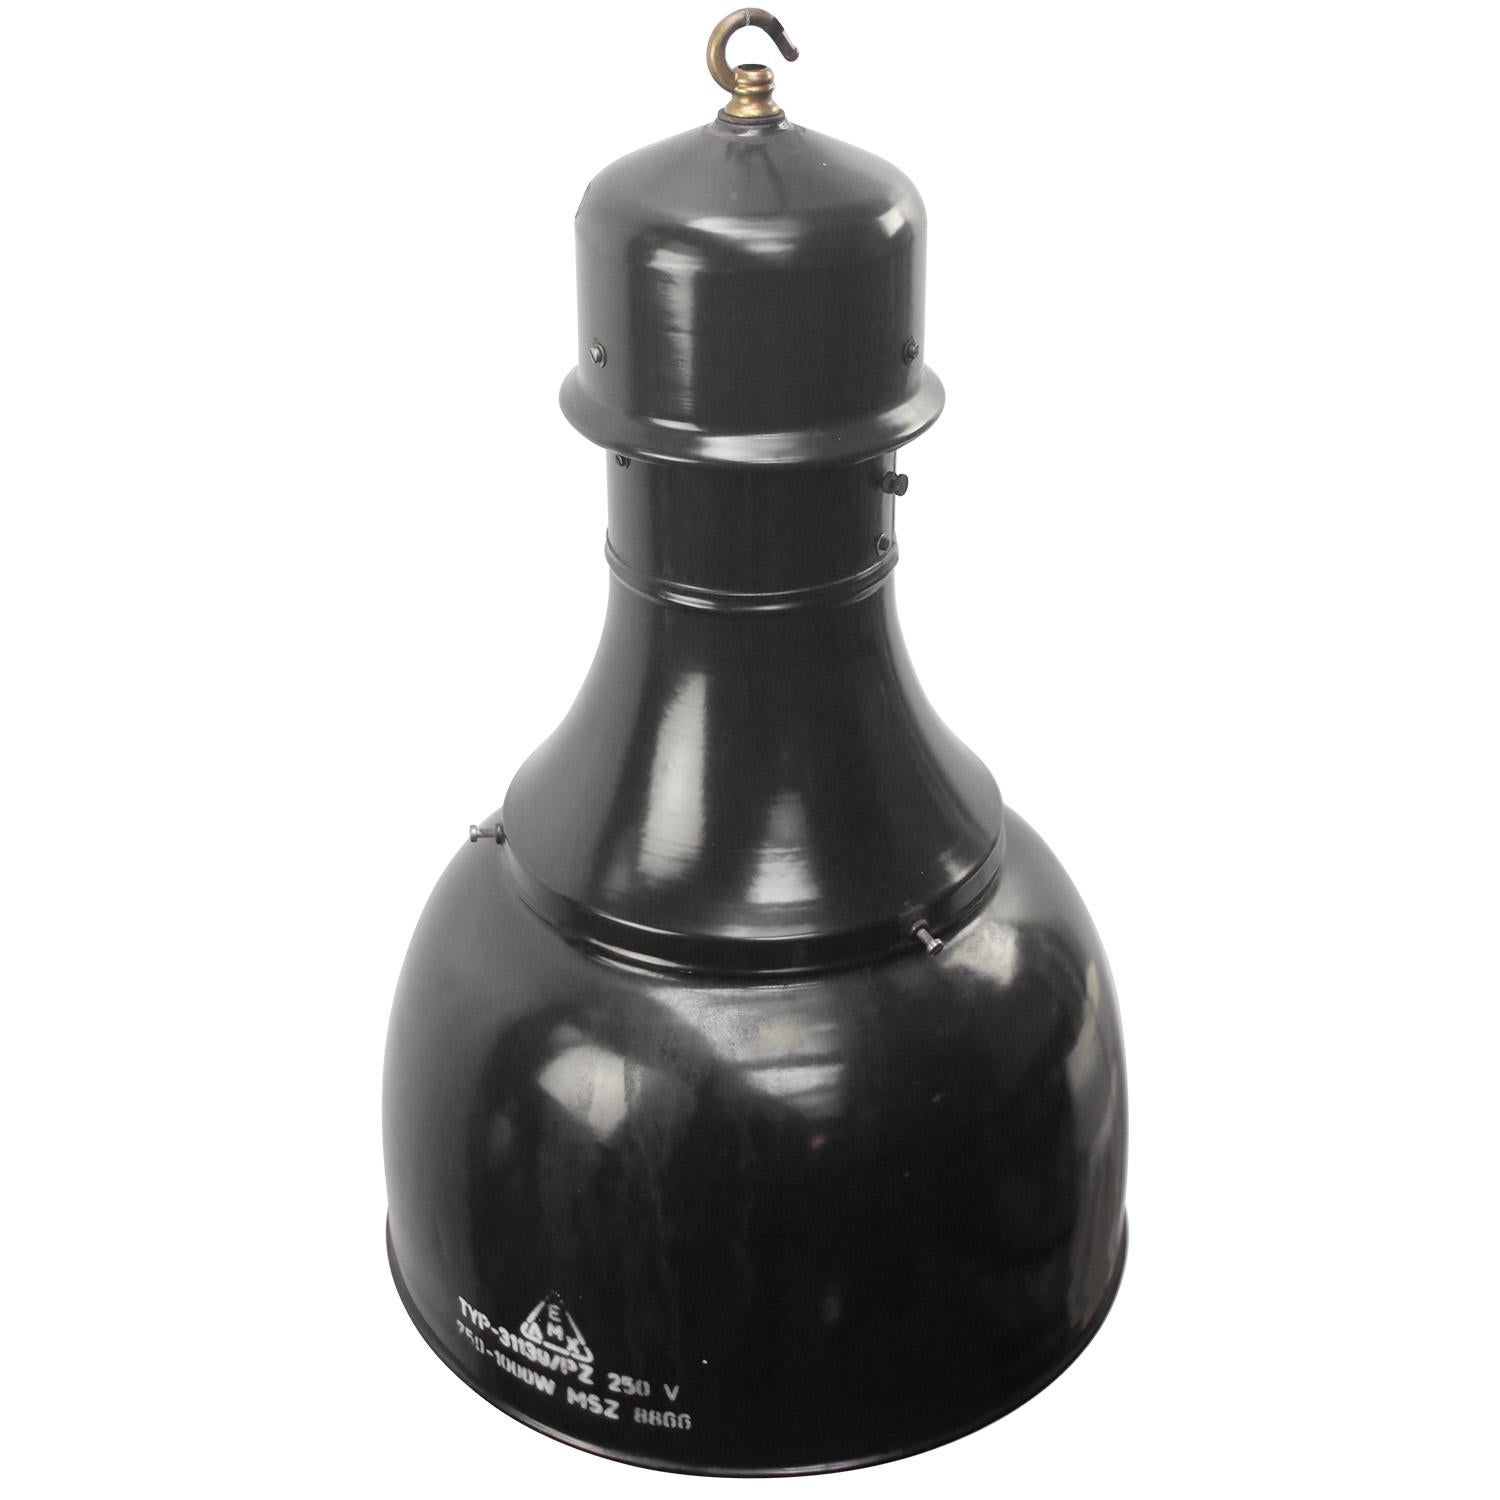 Factory light black enamel
white interior brass top

Weight: 4.9 kg / 10.8 lb

Priced per individual item. All lamps have been made suitable by international standards for incandescent light bulbs, energy-efficient and LED bulbs. E26/E27 bulb